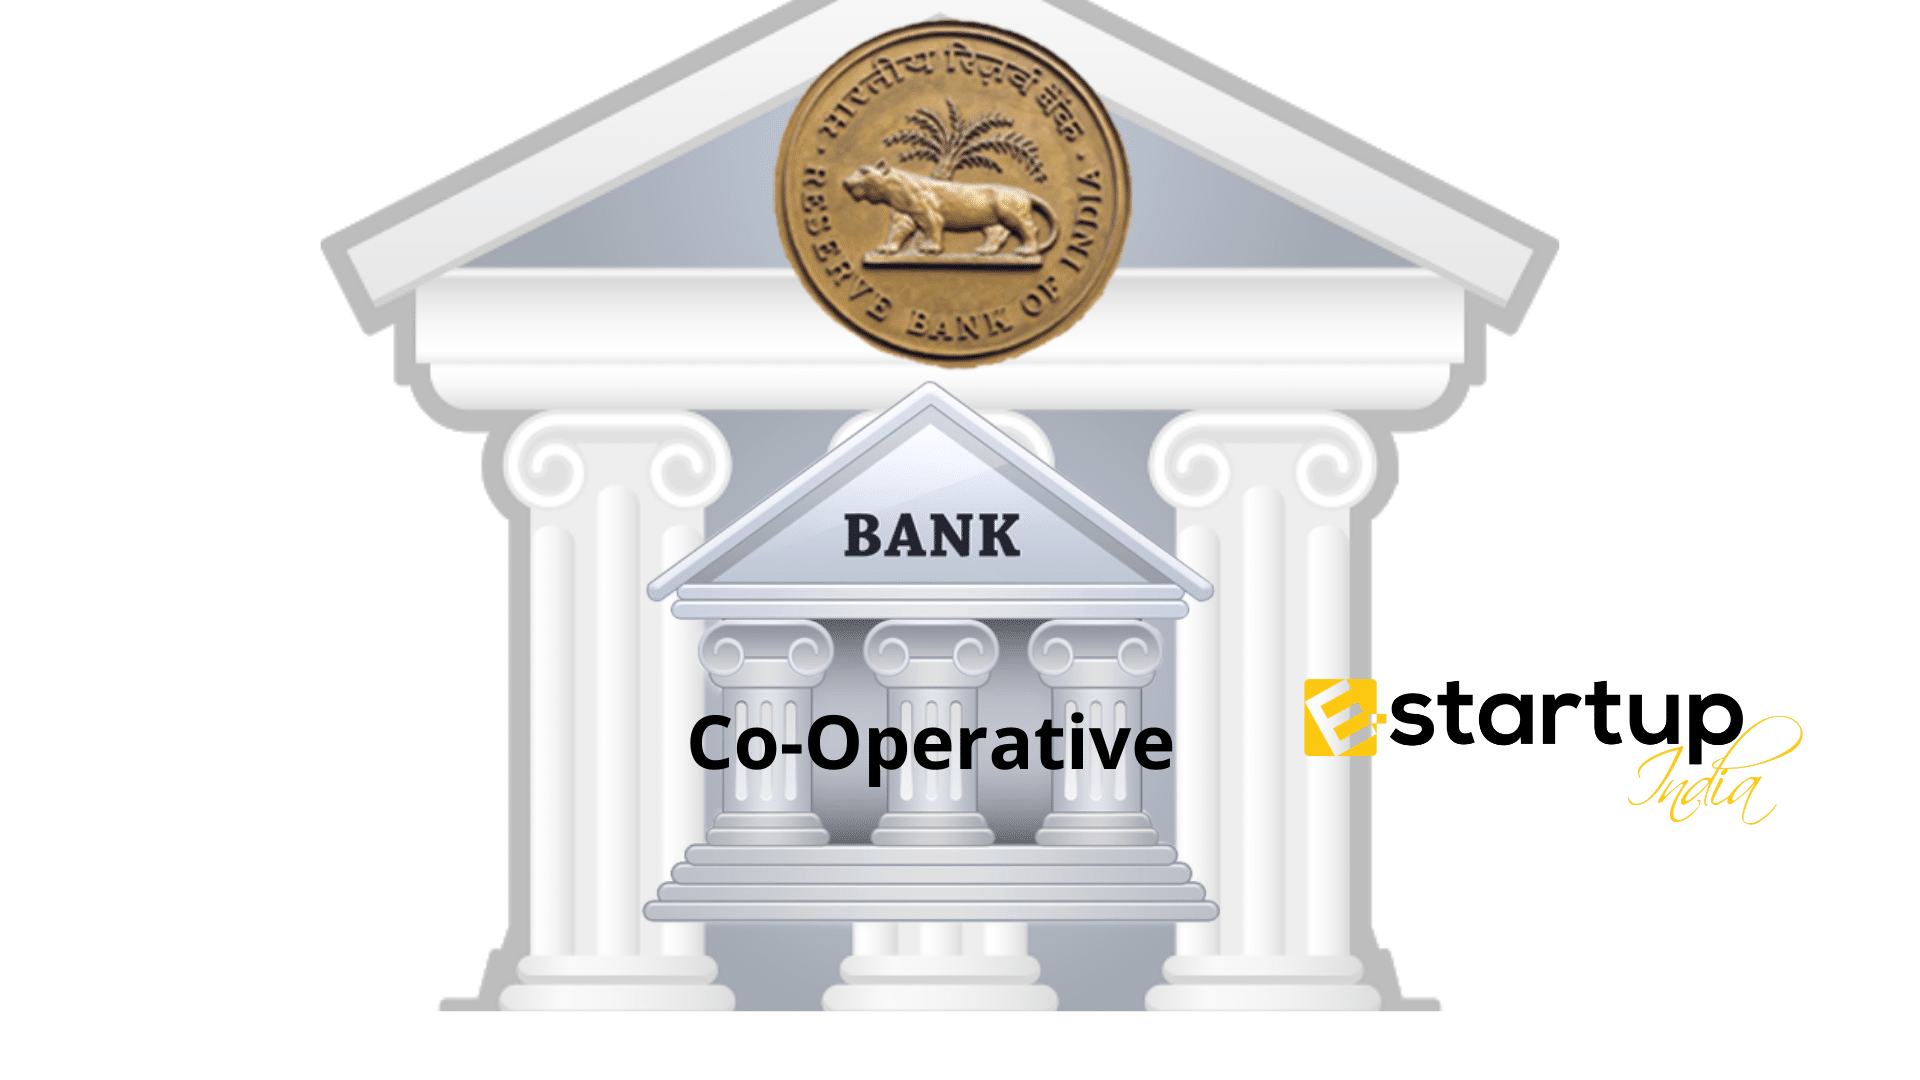 co-operative banks under RBI supervision